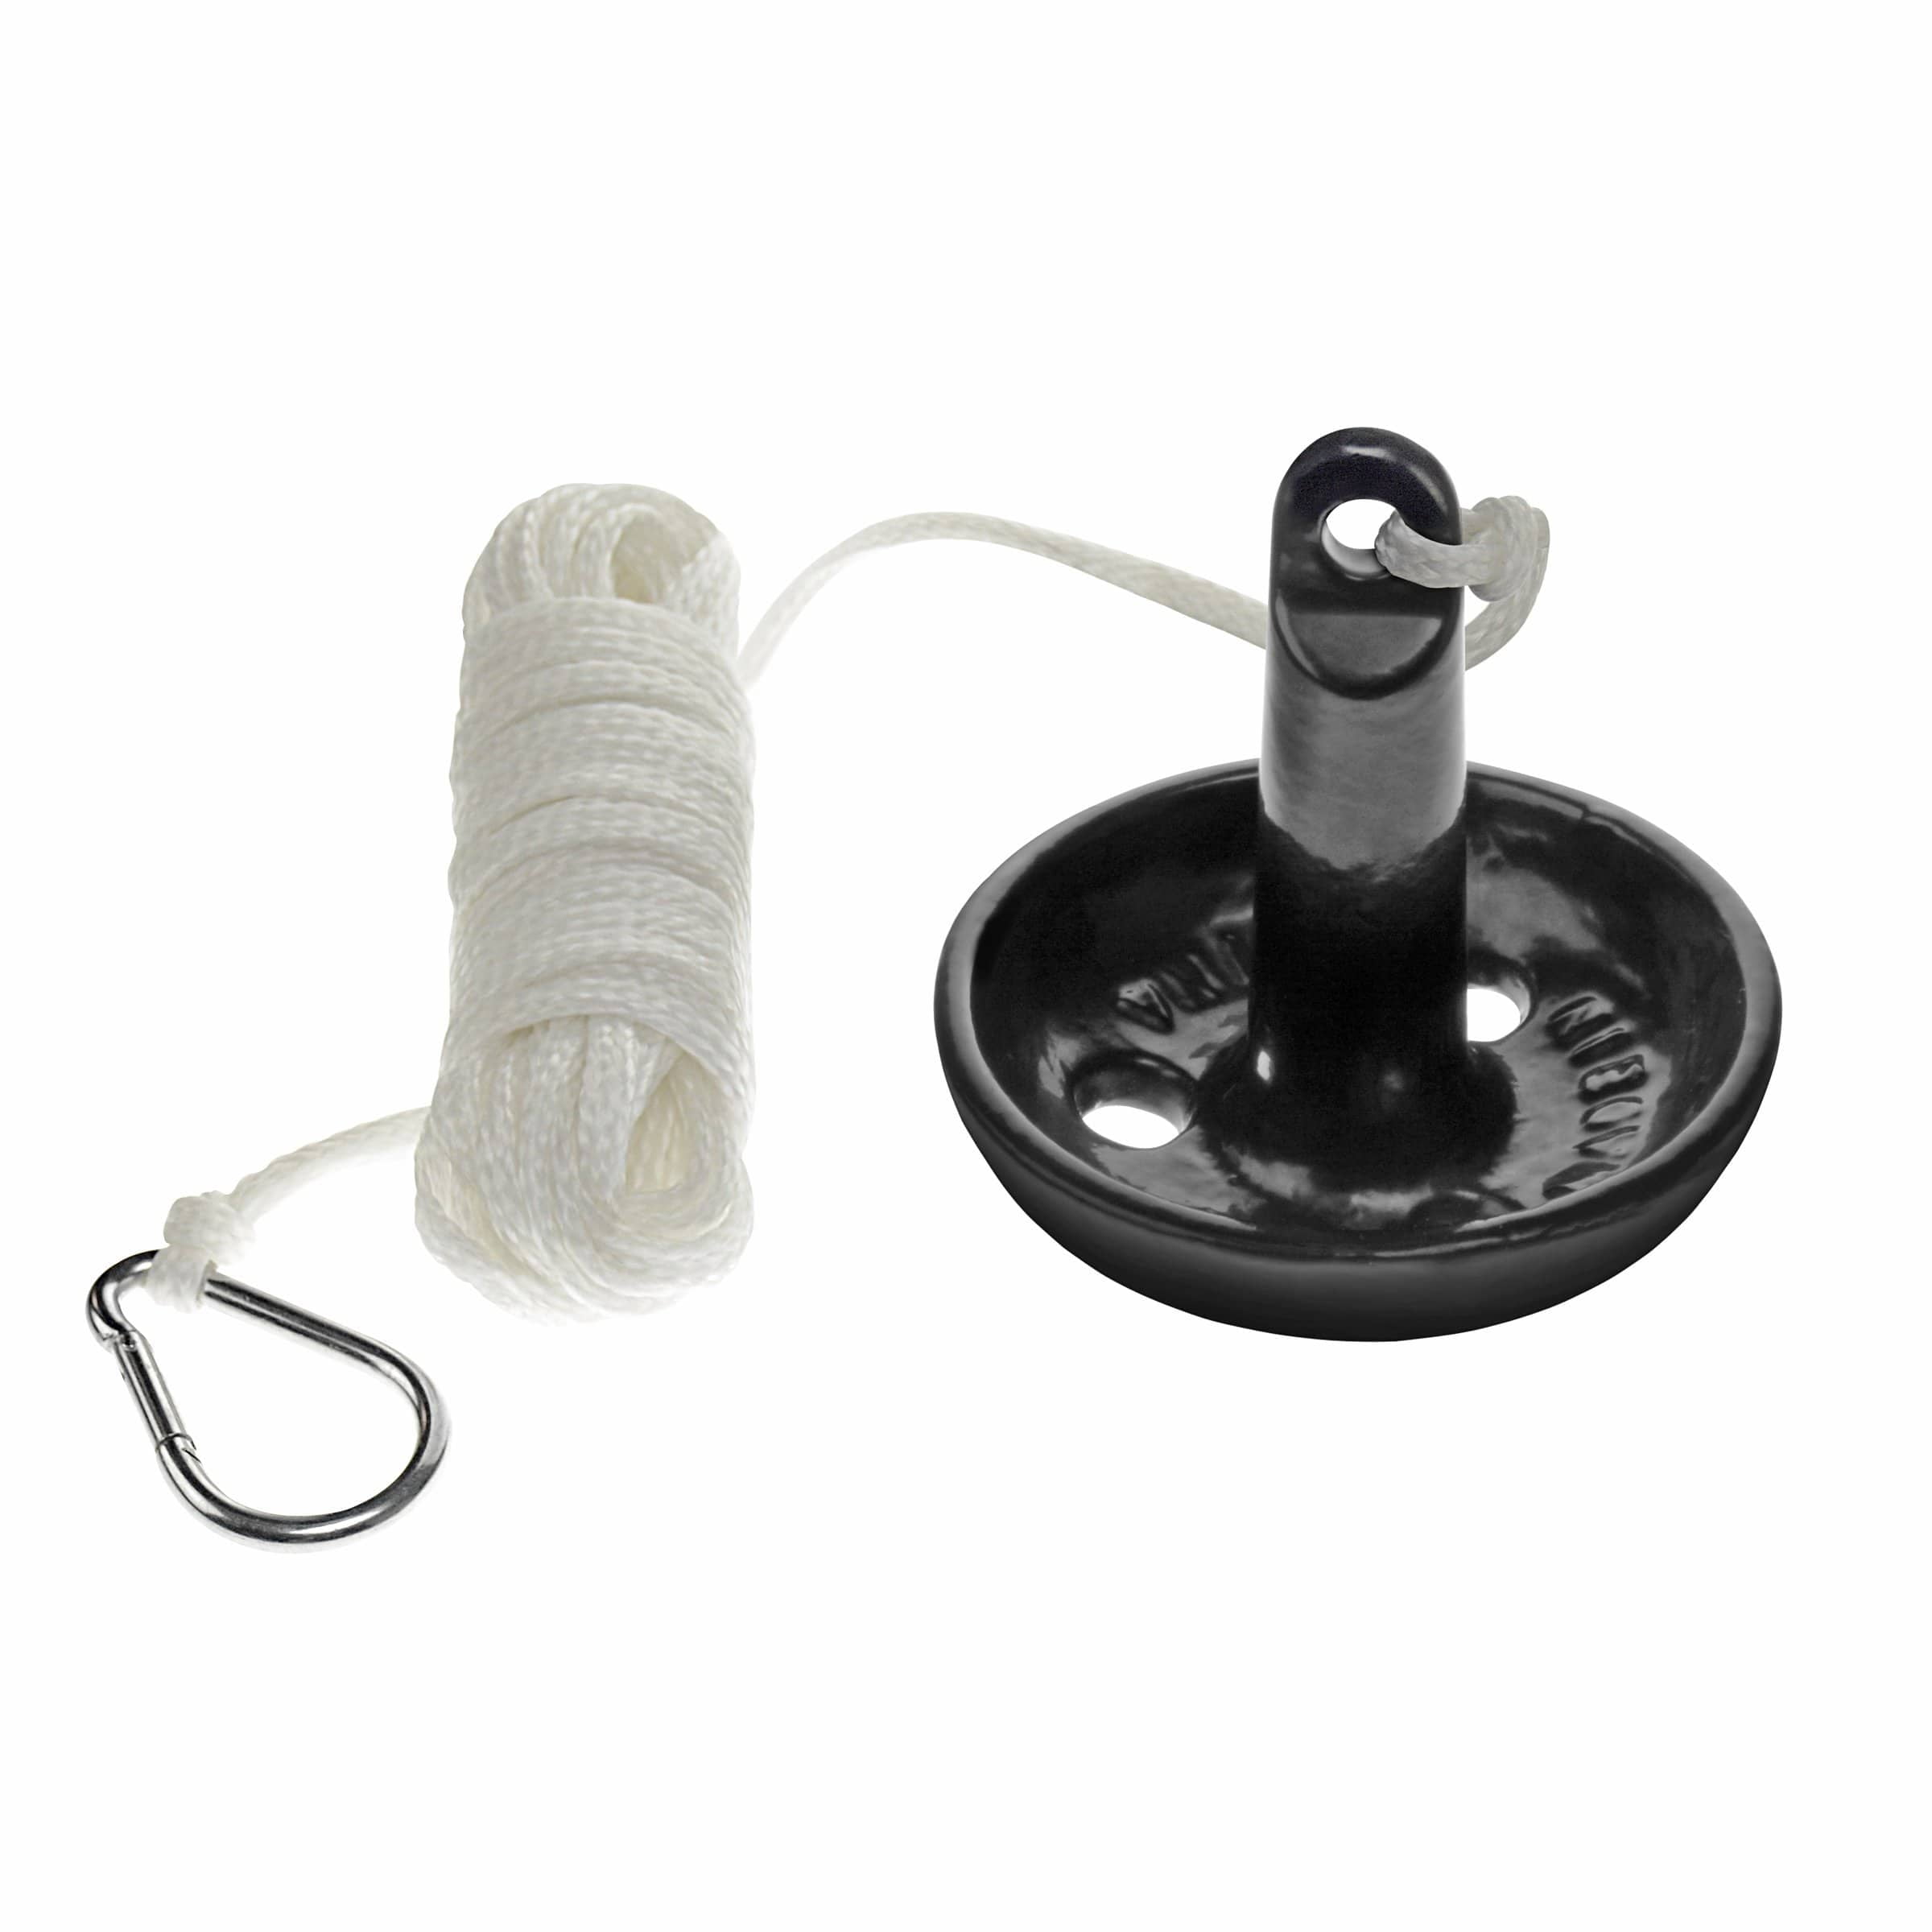 Black Extreme Max 3006.6714 BoatTector Complete Mushroom Anchor Kit with Rope/Marker Buoy-8 lb